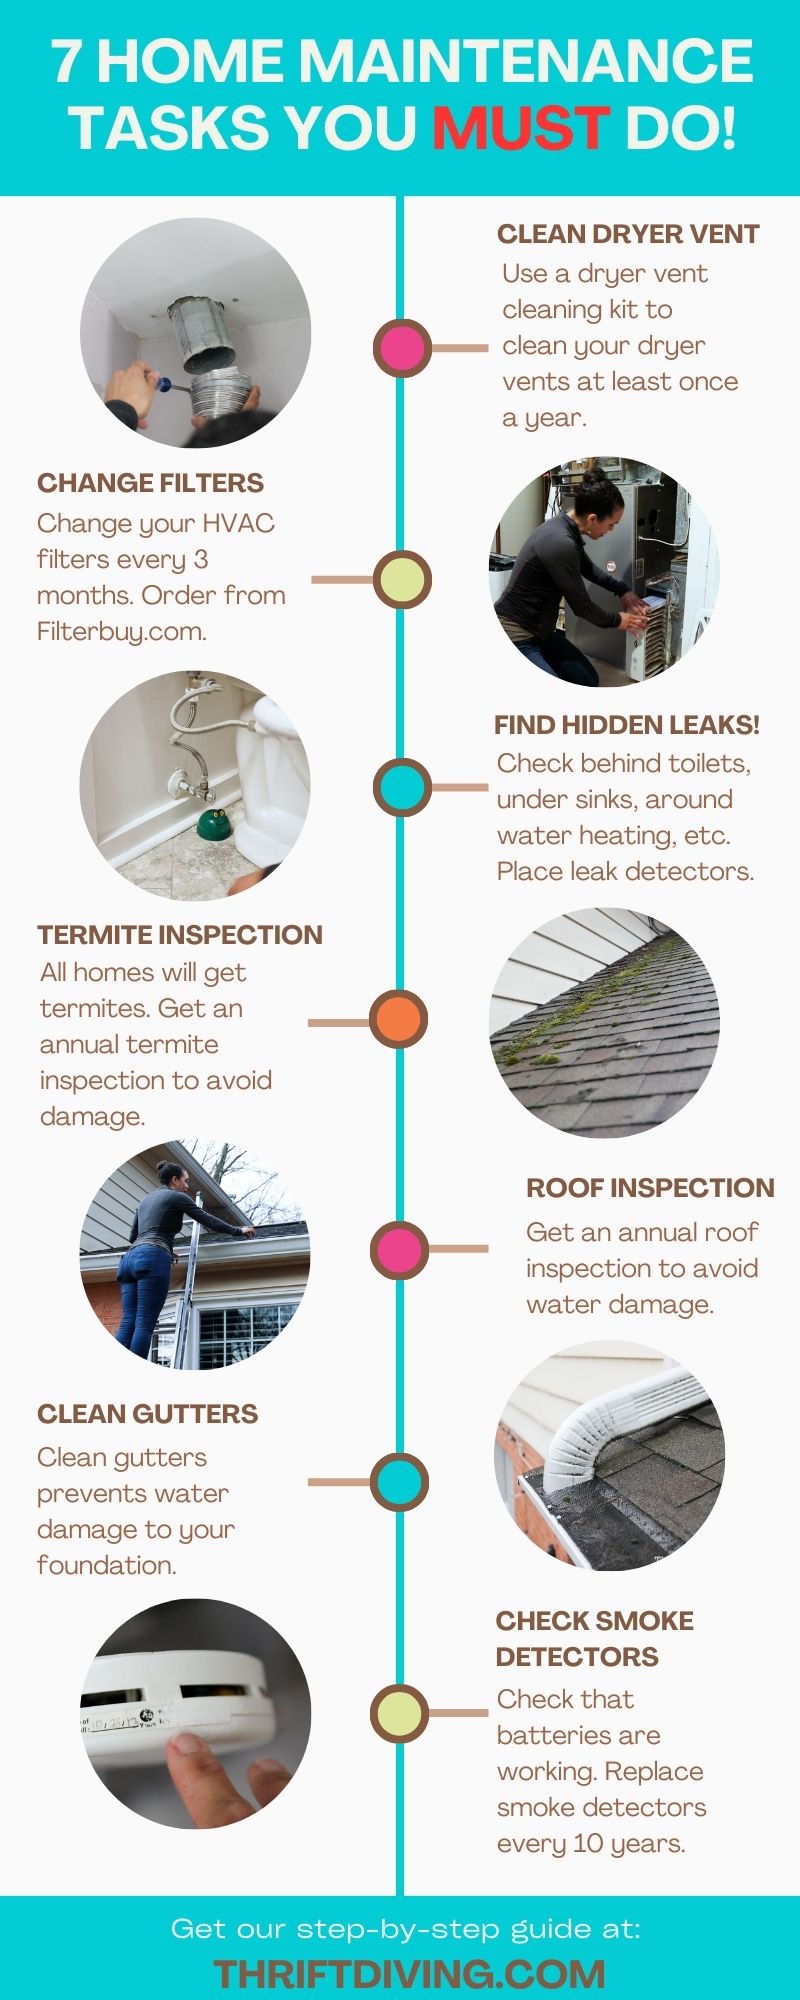 7 Home Maintenance Tasks You MUST Do - Avoid expensive repairs later down the road by doing these important home maintenance tasks. - Thrift Diving